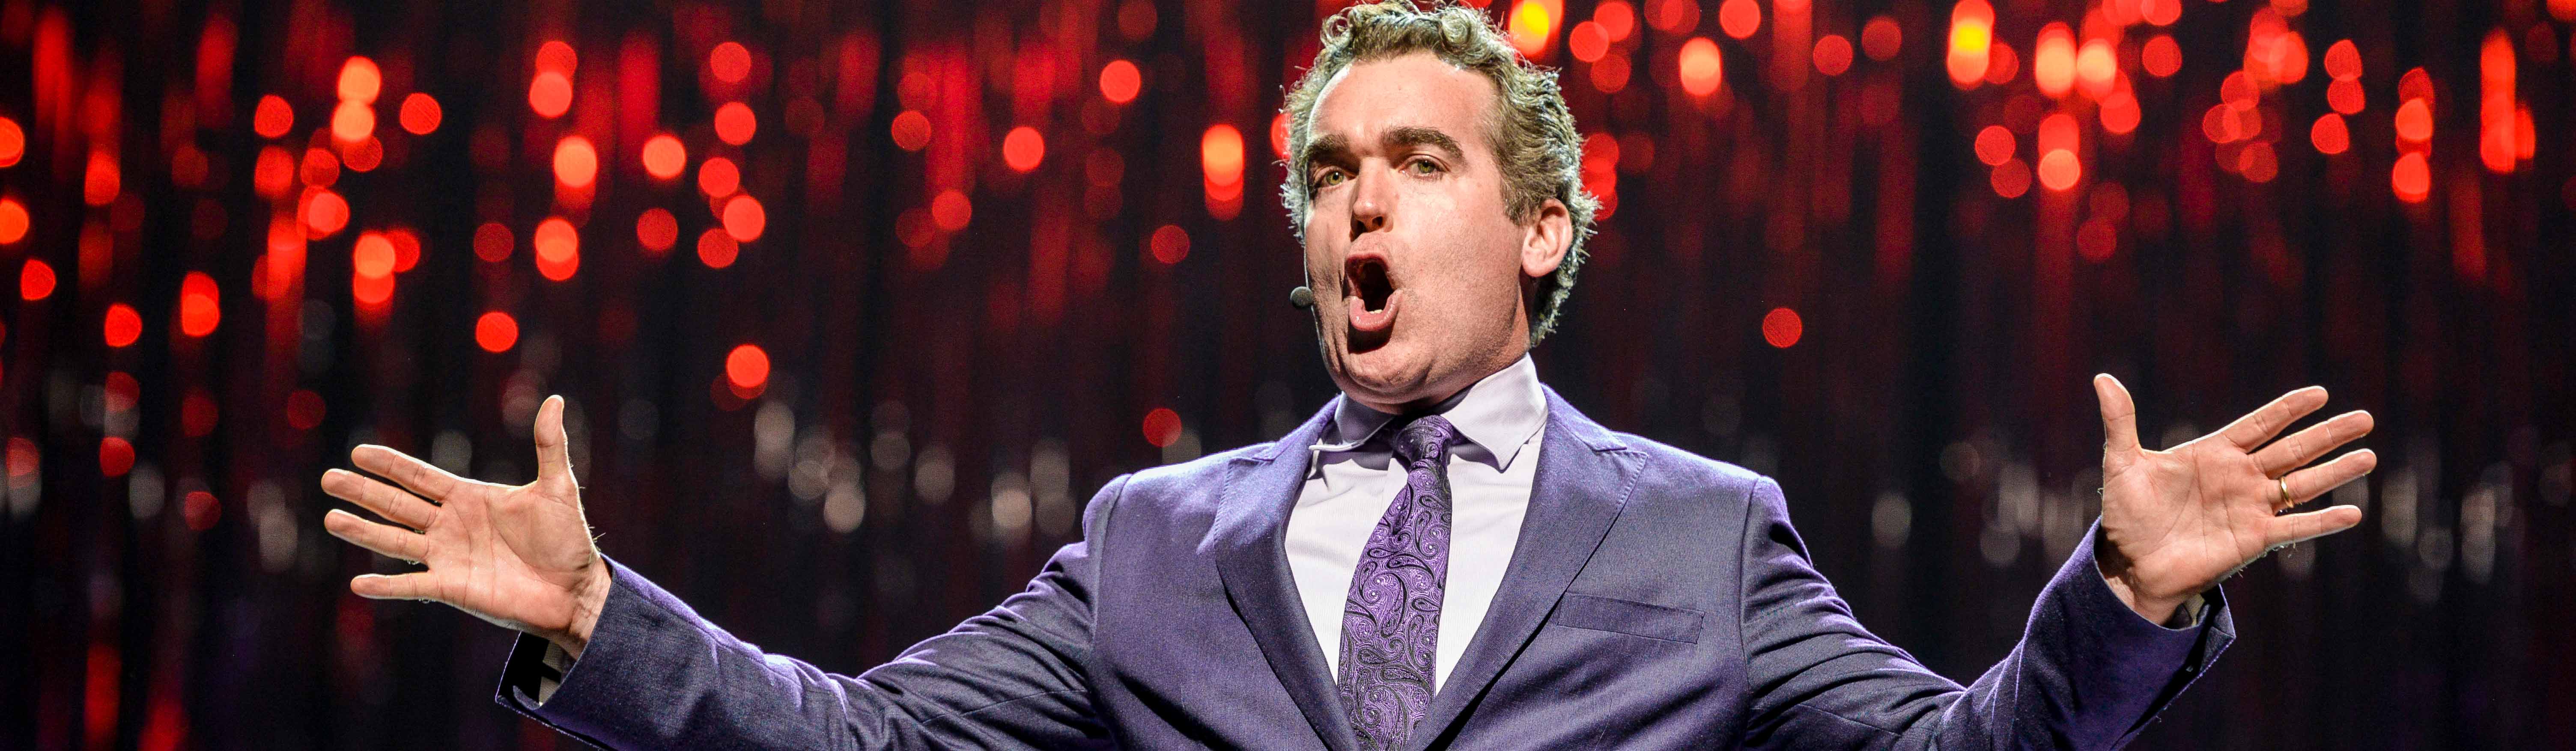 Actor Brian D'Arcy James sings with arms outstretched